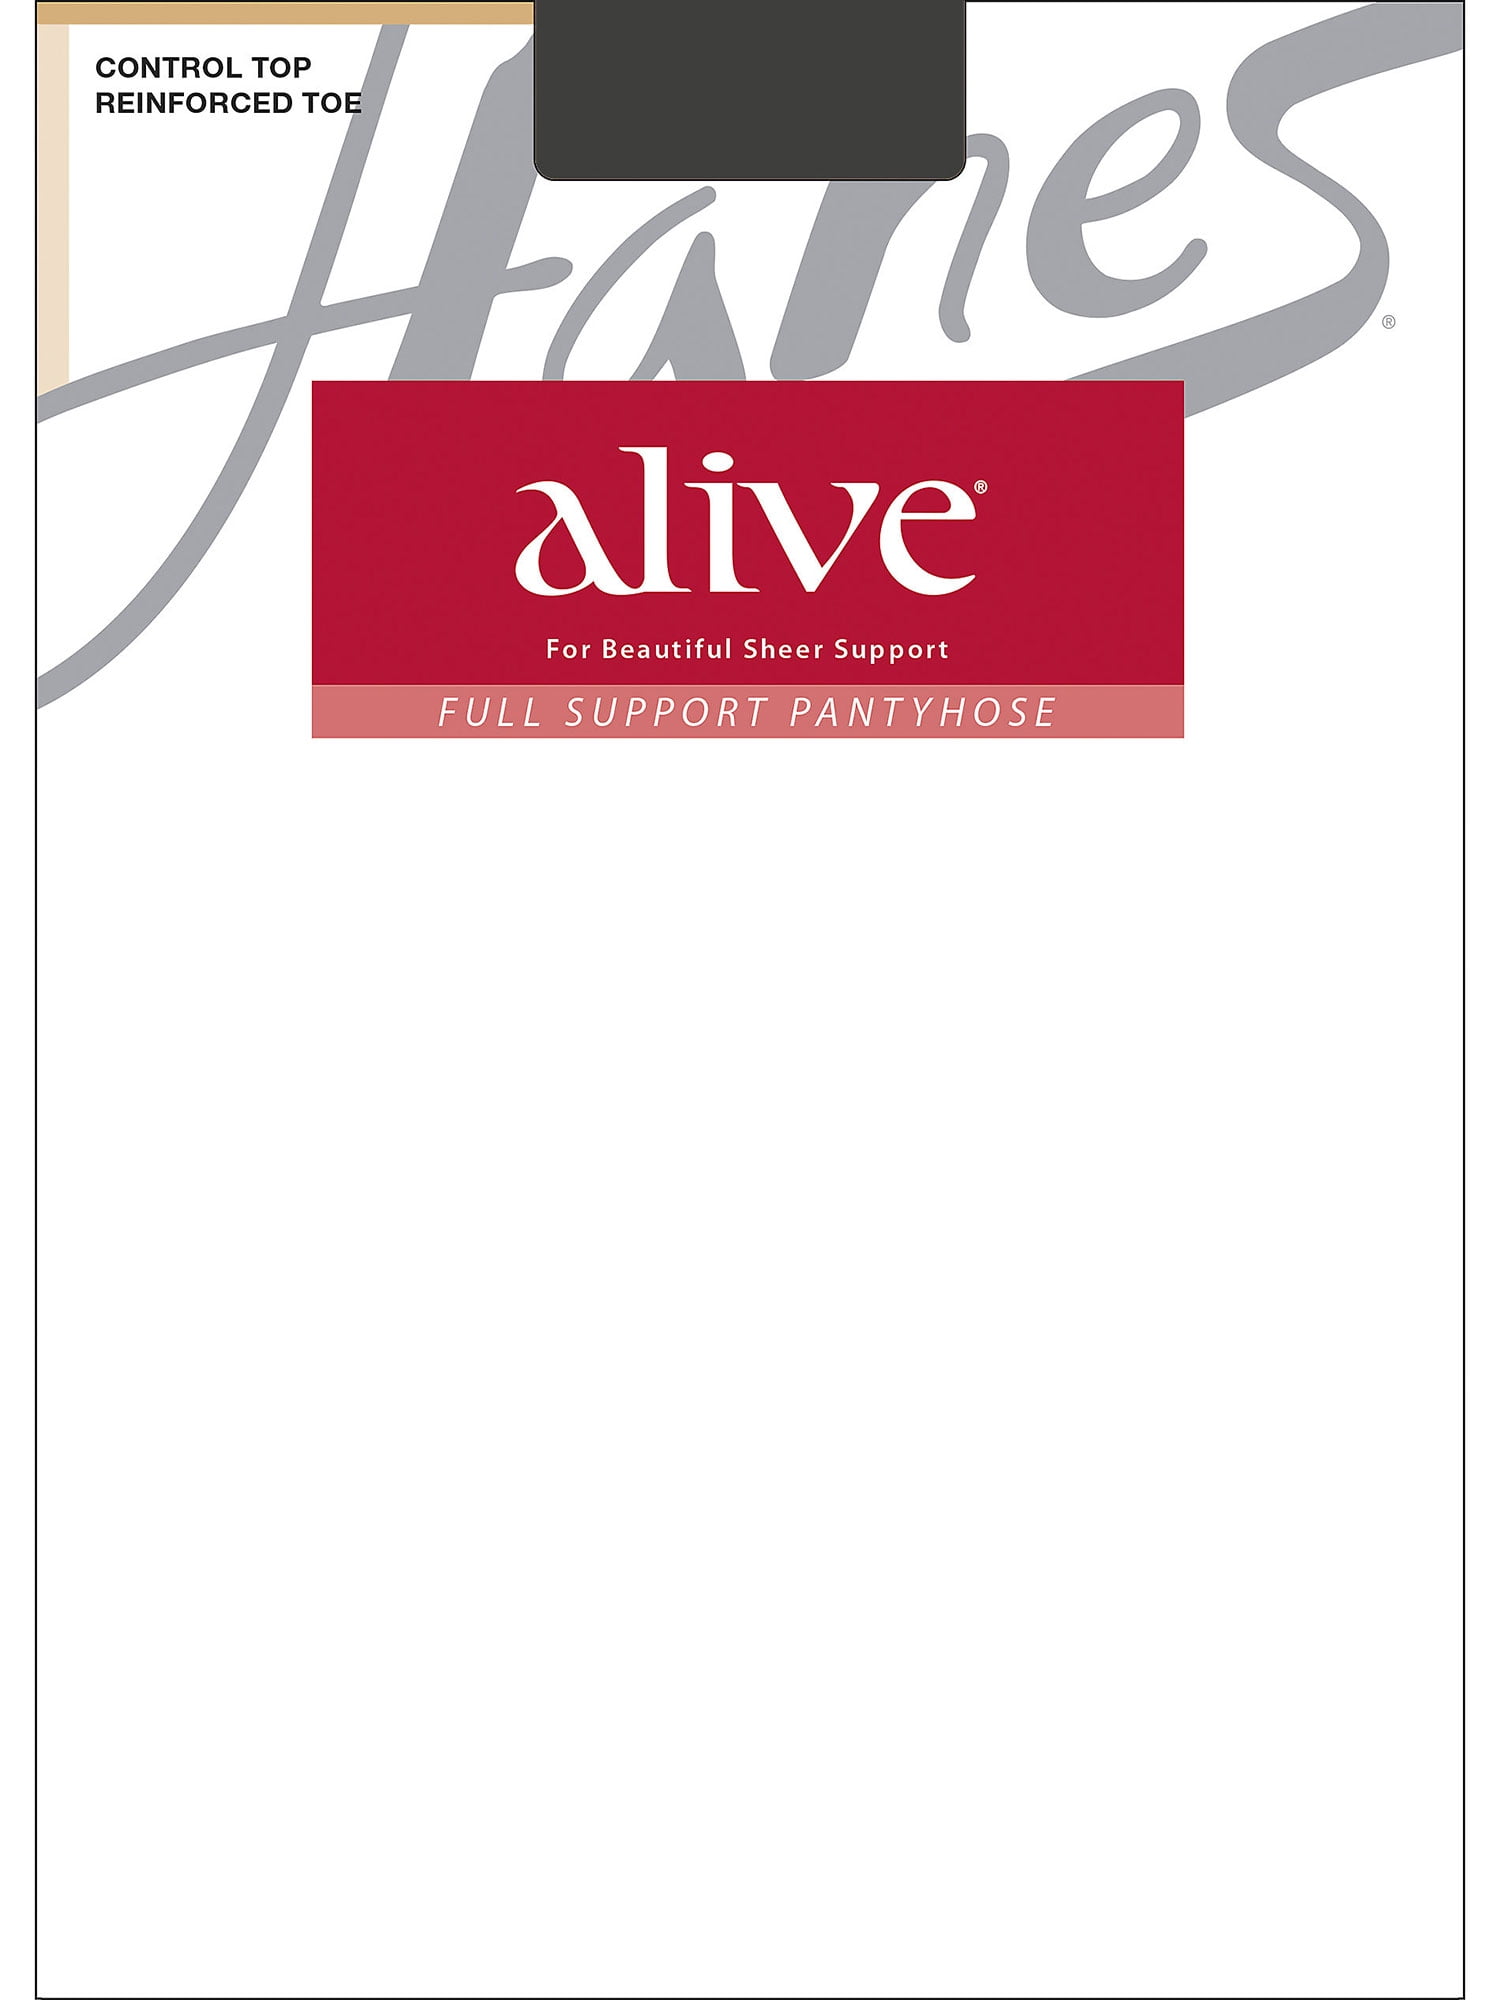 Hanes Alive Full Support Pantyhose with Control Top, Reinforced